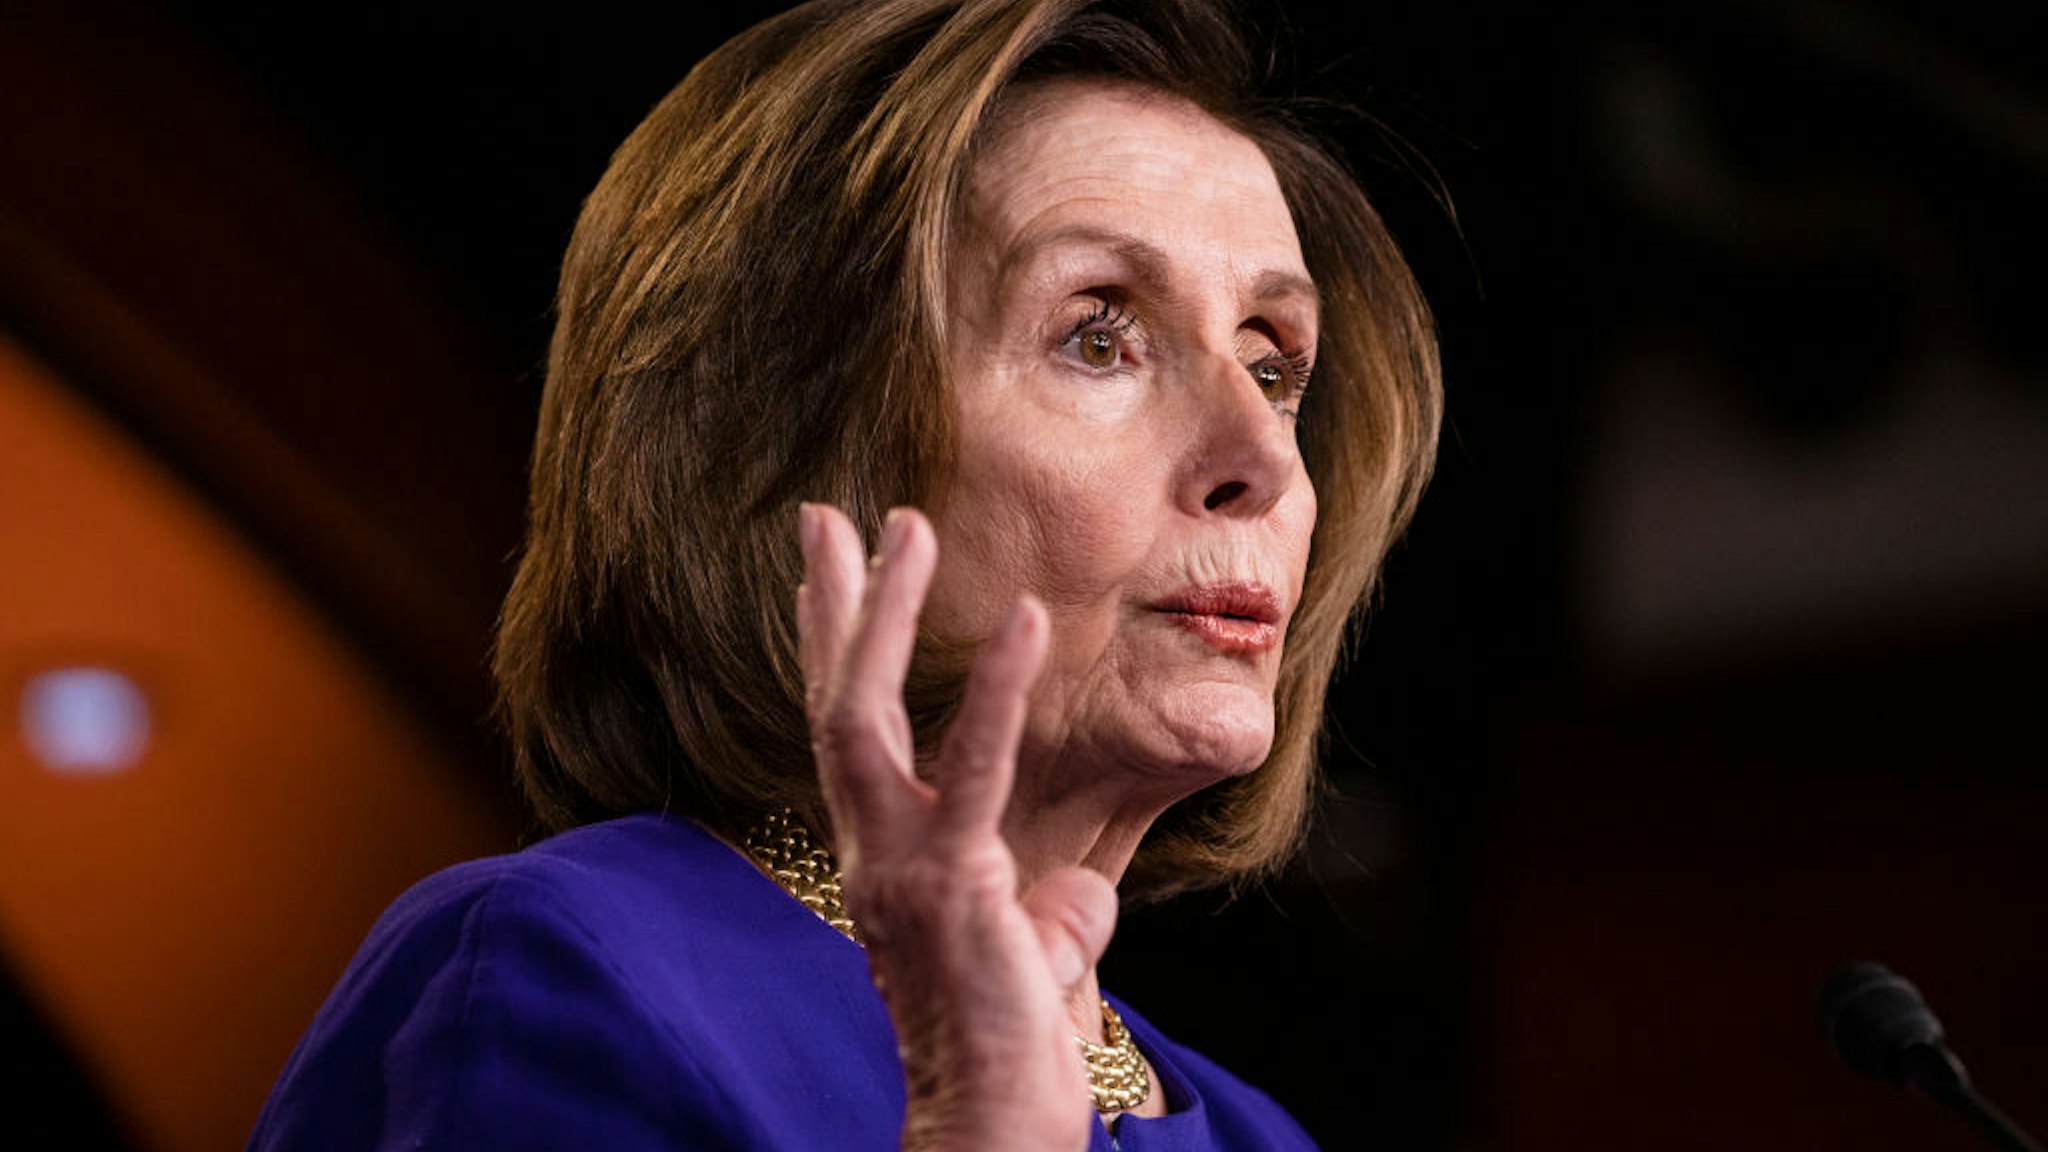 Speaker of the House Nancy Pelosi (D-CA) holds her weekly press conference on Capitol Hill on March 5, 2020 in Washington, DC.